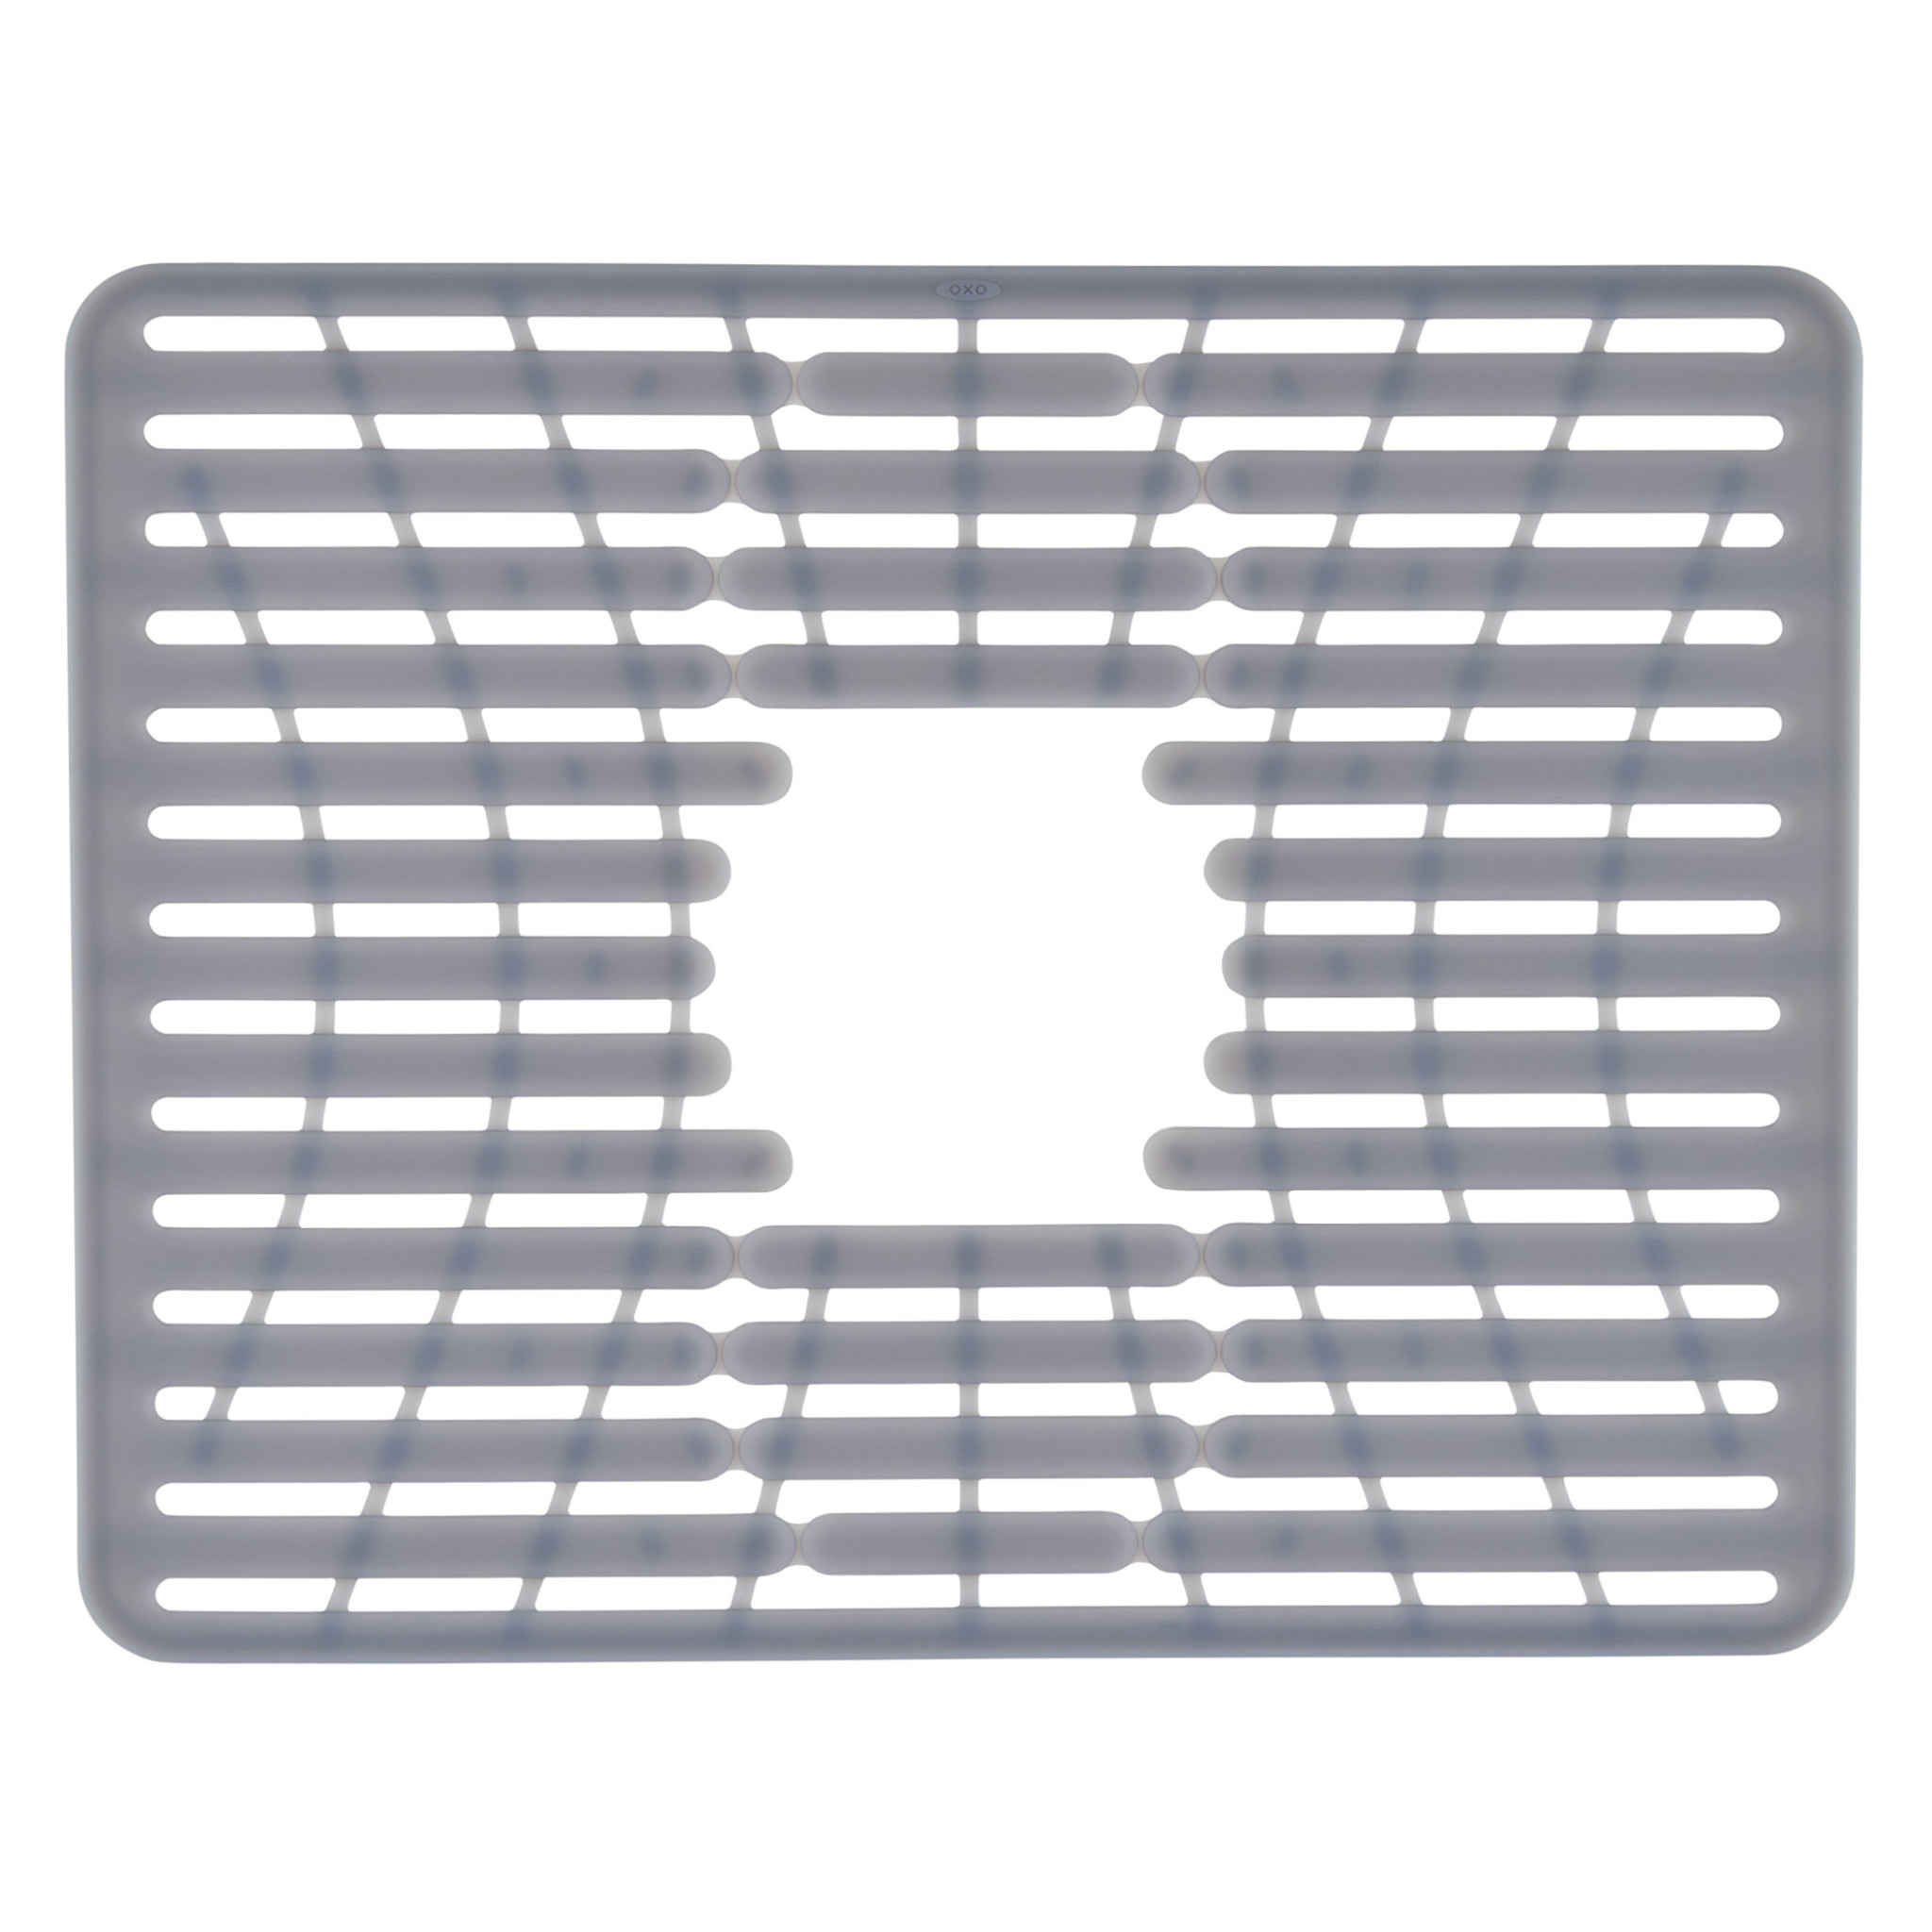 OXO Good Grips Sink Grid & Reviews